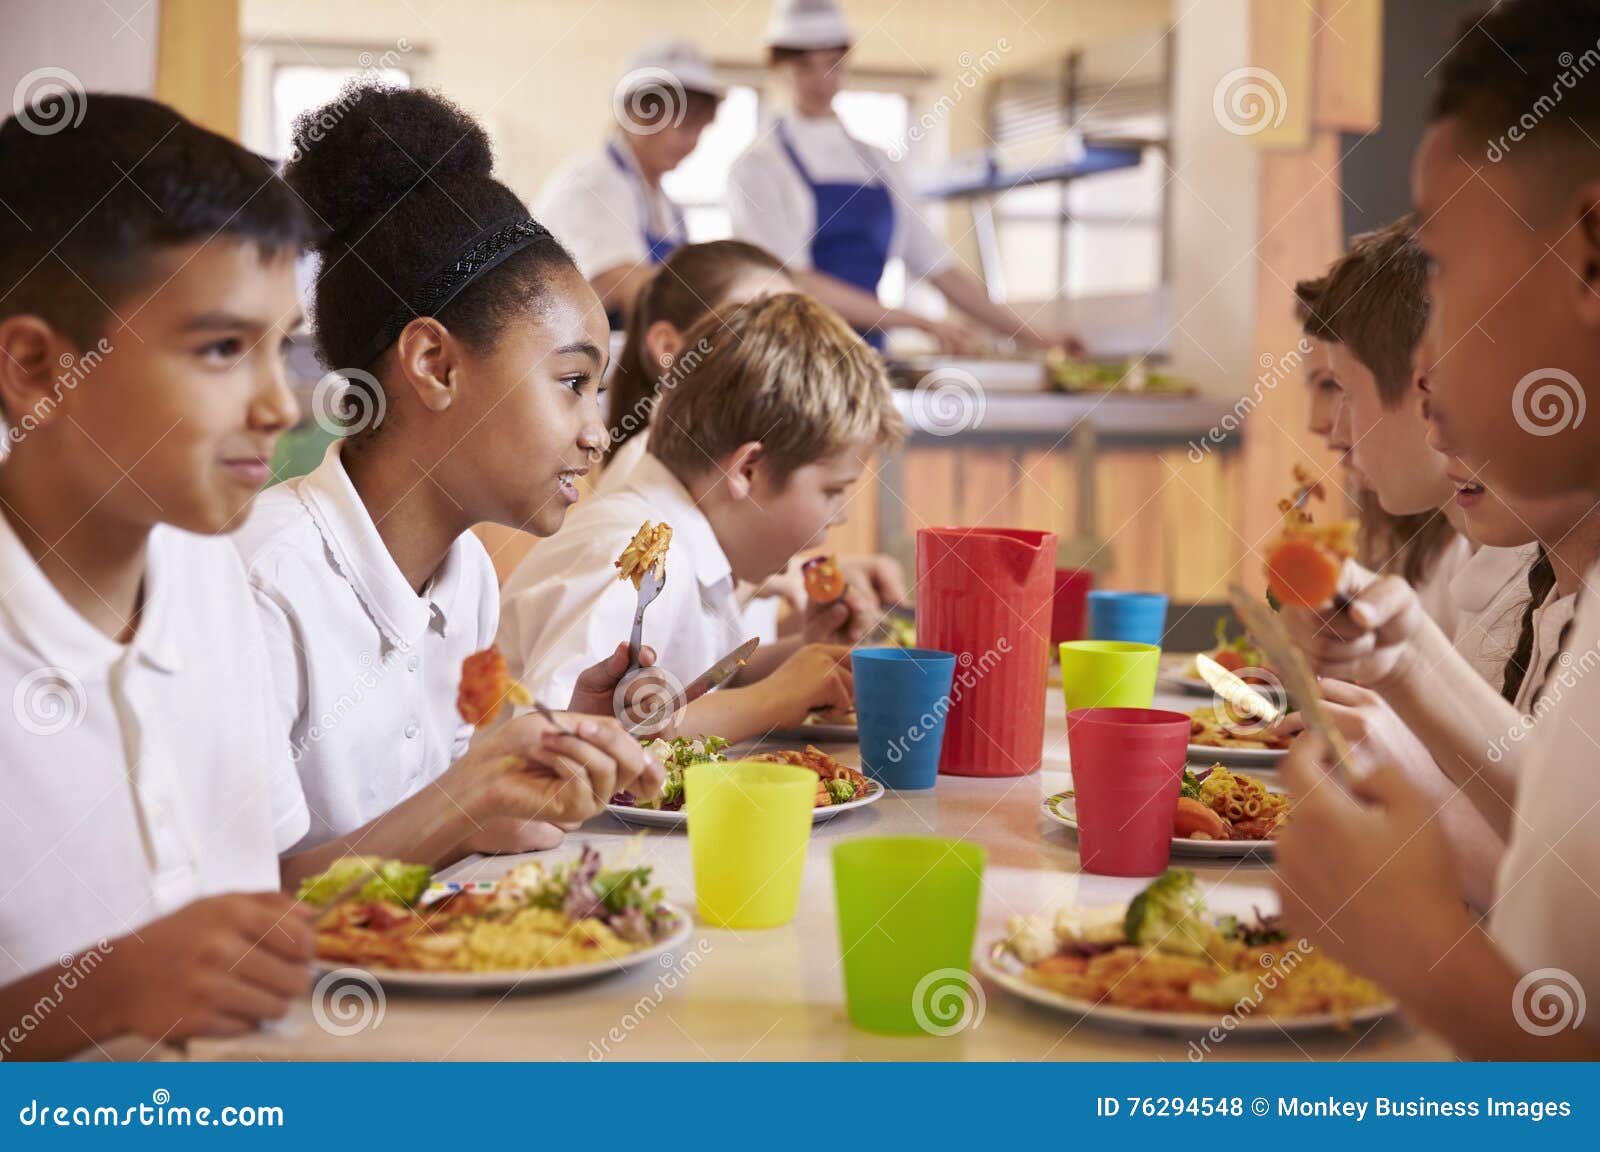 primary school kids eat lunch in school cafeteria, close up